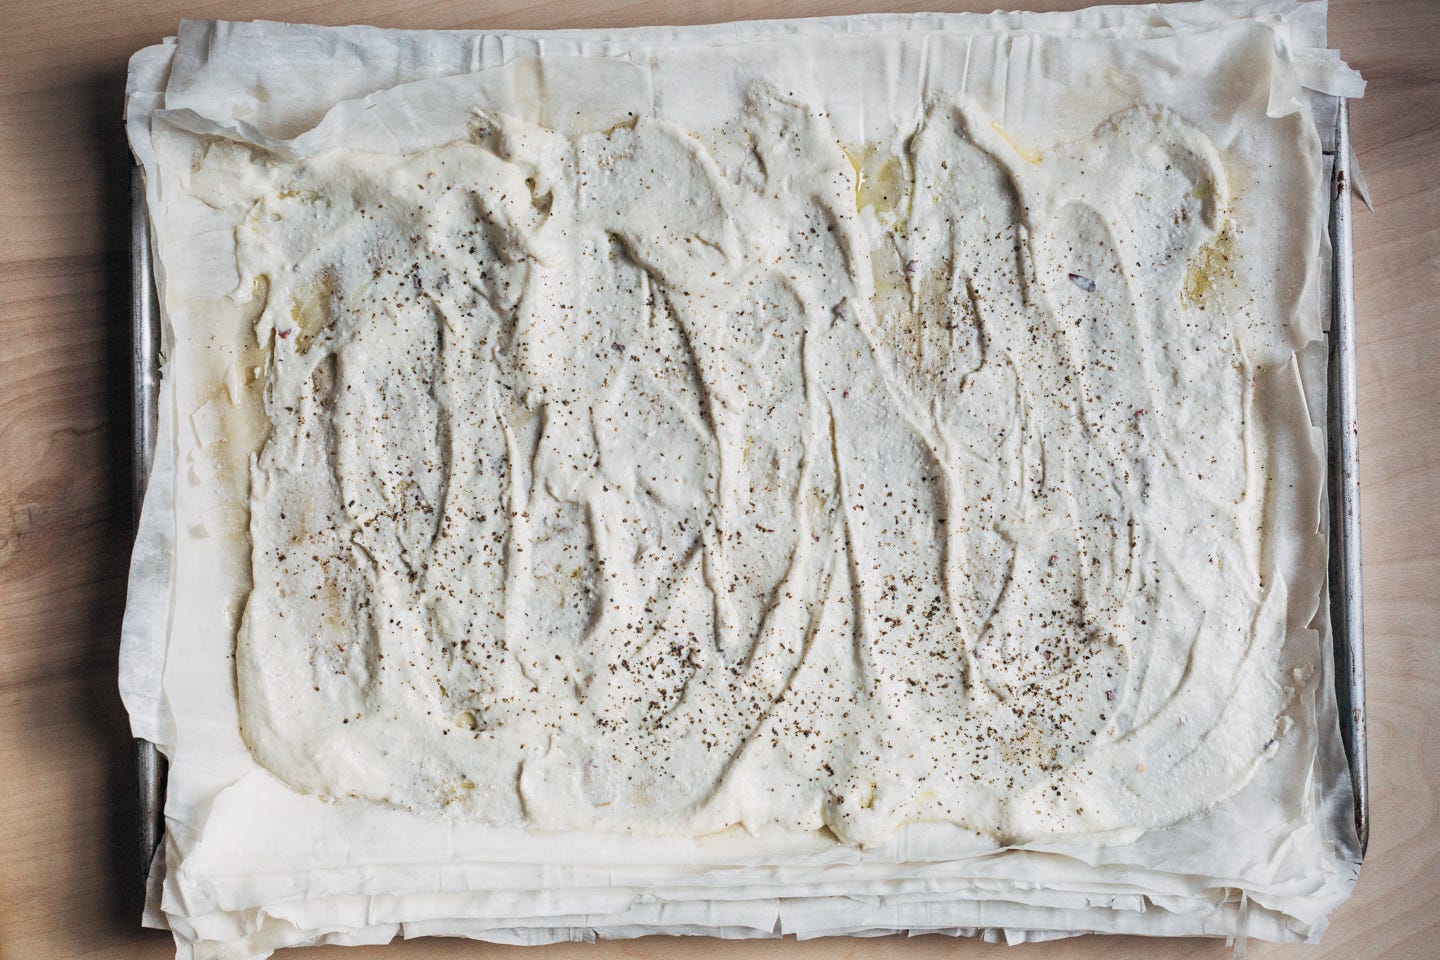 Phyllo dough on a sheet pan with ricotta smeared on top.